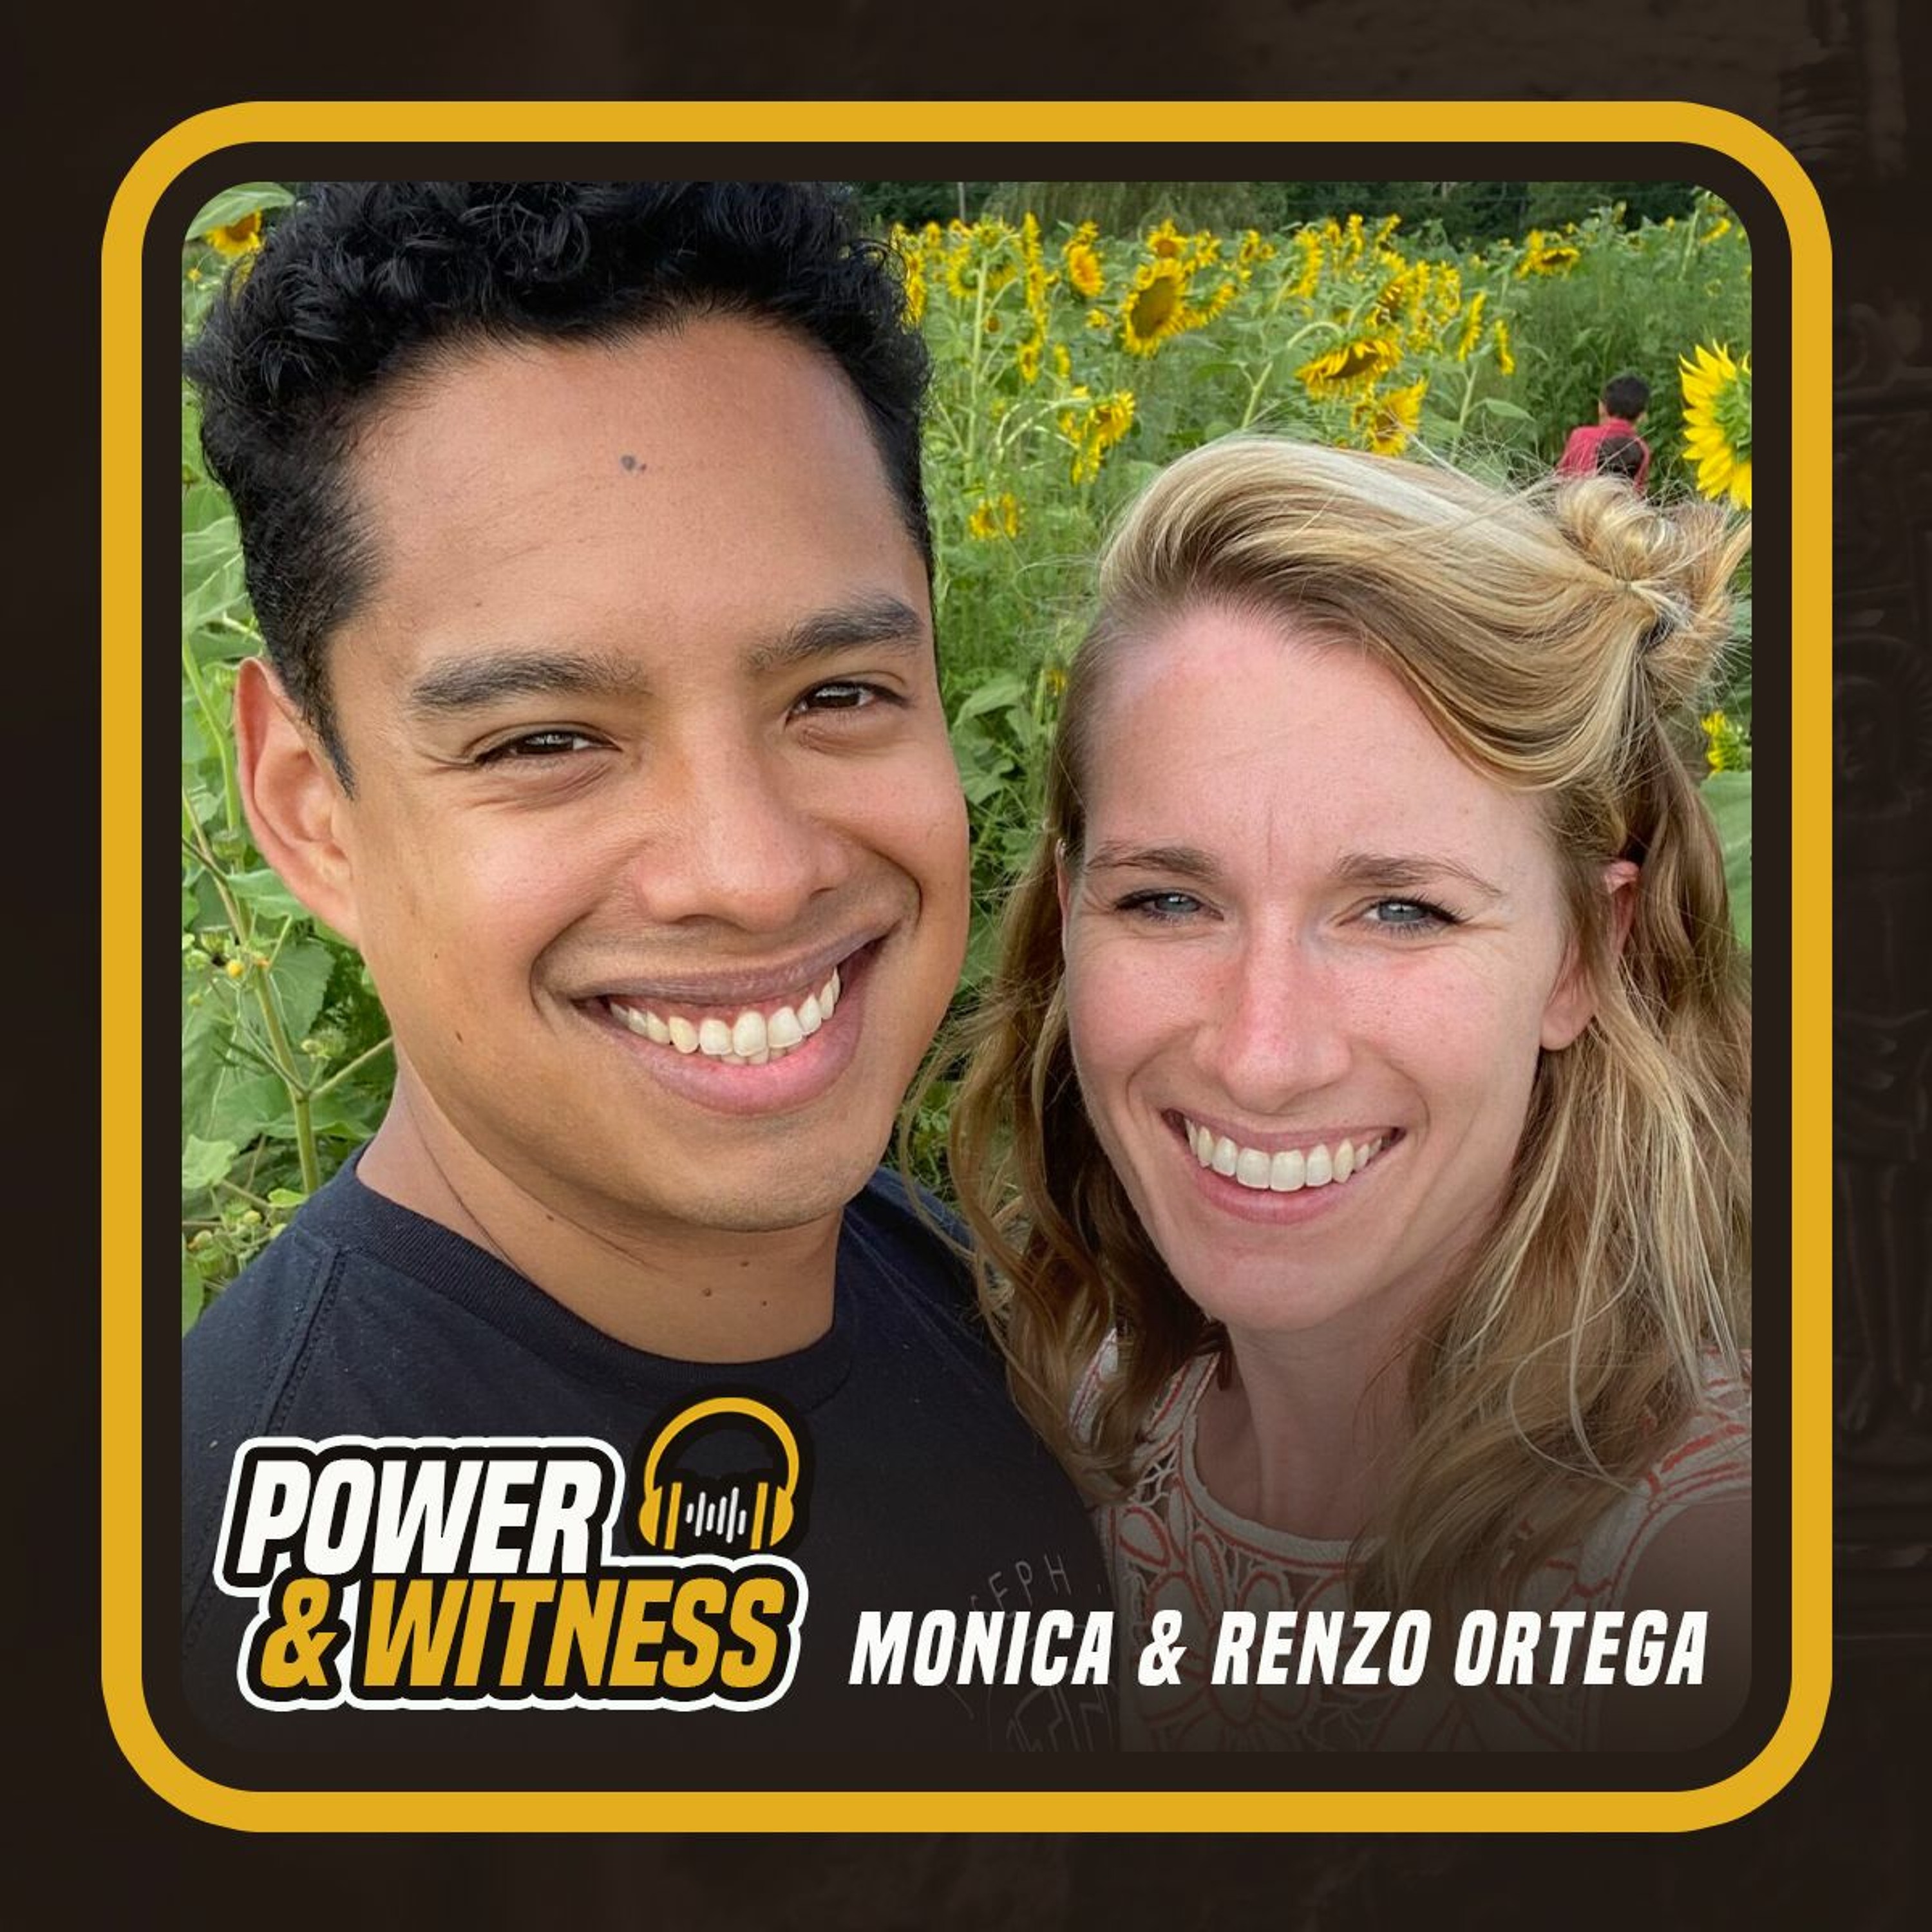 Restoring Confidence in Marriage and Family Life (Guests: Monica & Renzo Ortega)